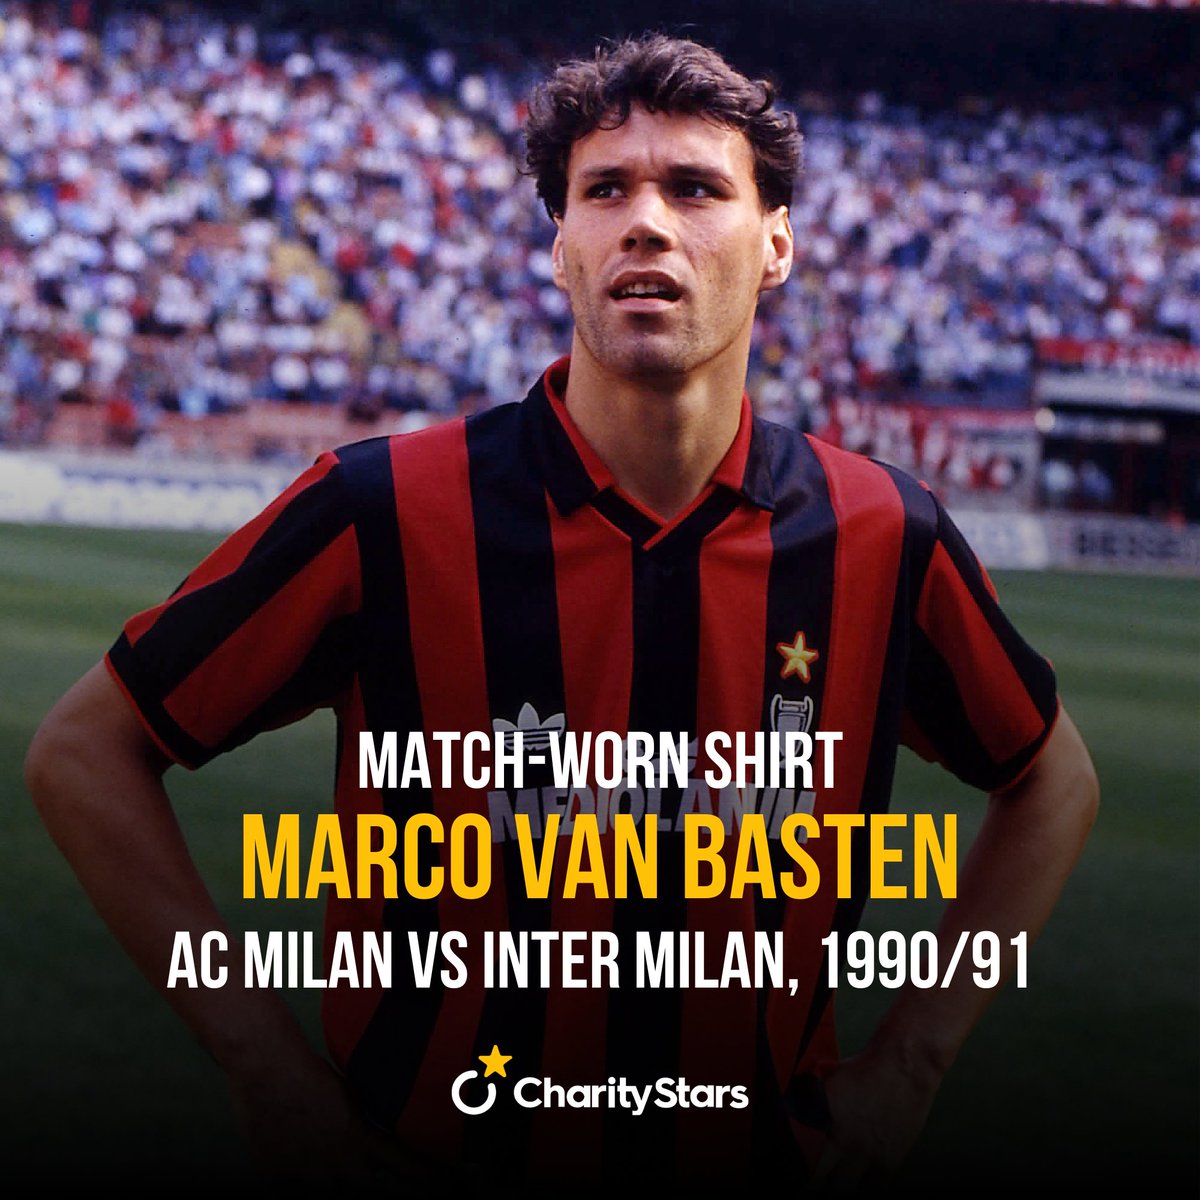 Adding a shirt worn by Marco Van Basten to your collection is special 🔴⚫️, but what about winning the shirt worn in the 1990/91 derby against Inter? Priceless! 🤩 Take your chance now on #CharityStars ✨ charitystars.com/product/van-ba… #CharityStars #VanBasten #SempreMilan